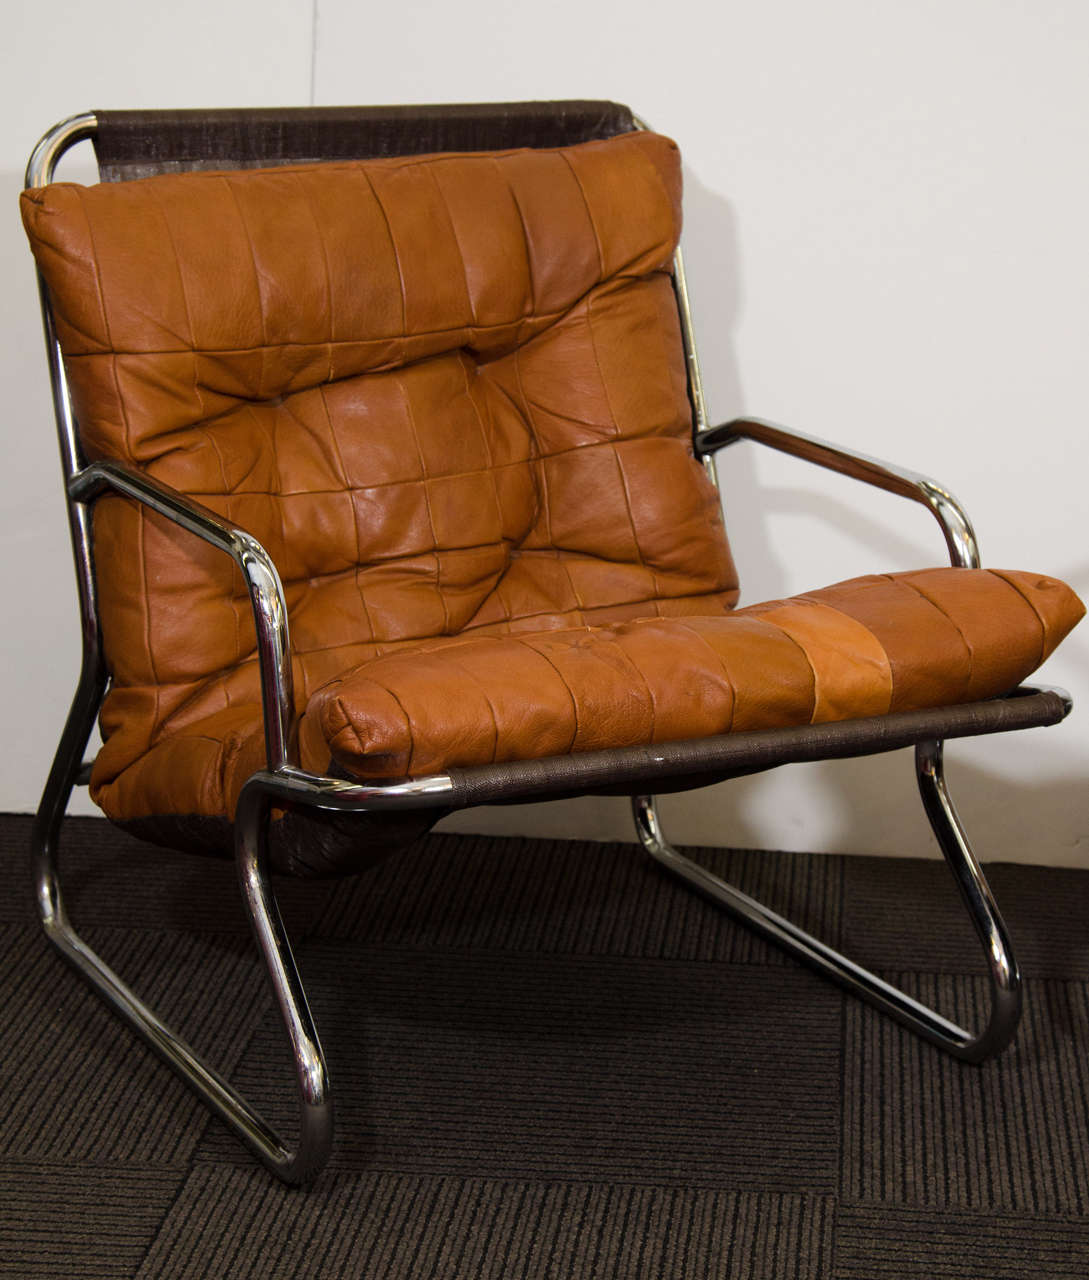 A Danish modern set of two button tufted patchwork leather and tubular chrome lounge chairs. One is a rust colored leather. The other is caramel colored leather.
 